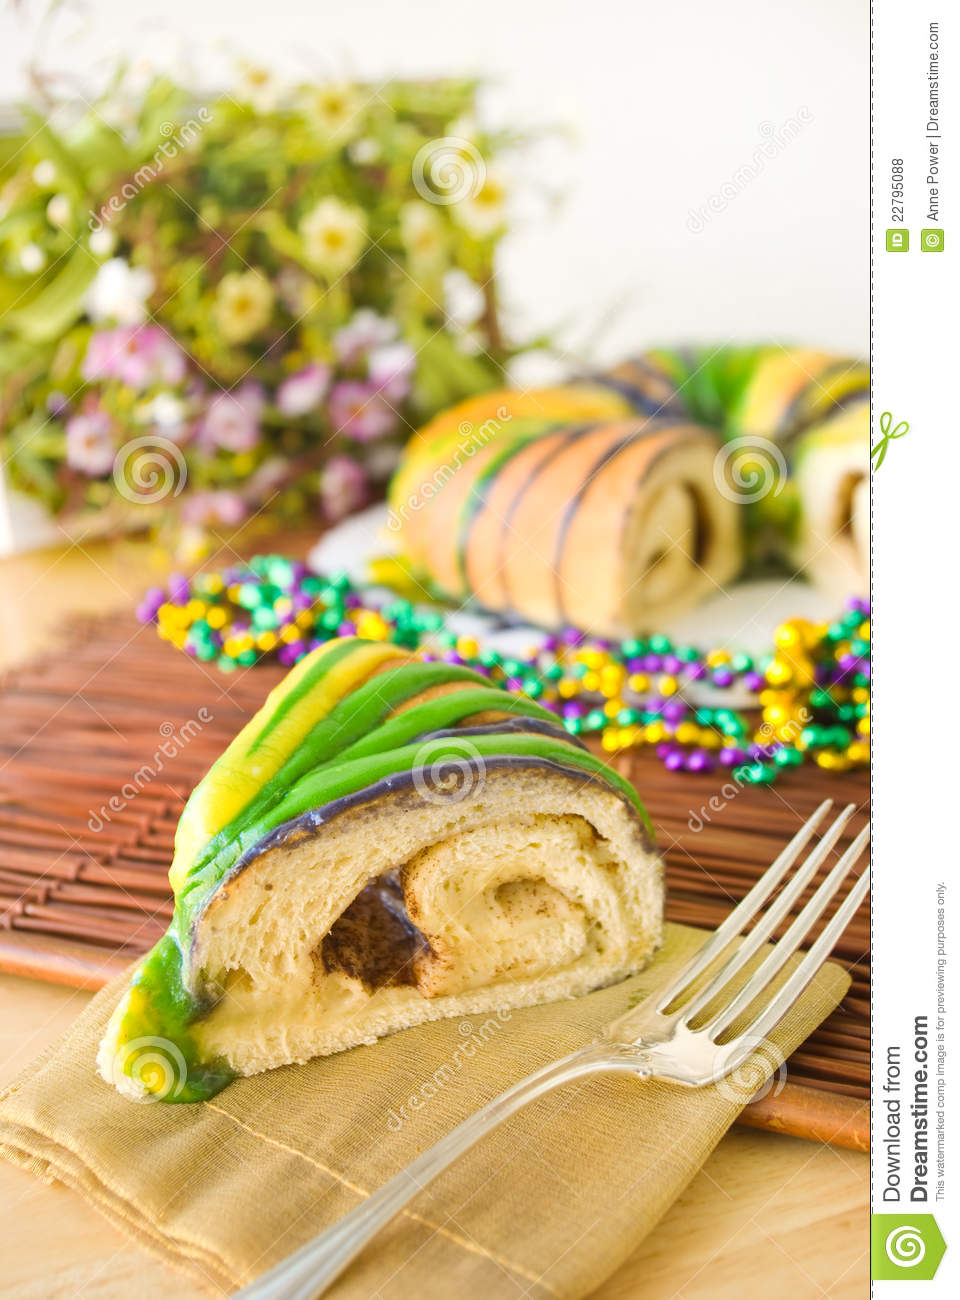 Slice Of Traditional New Orleans Style King Cake To Celebrate Mardi